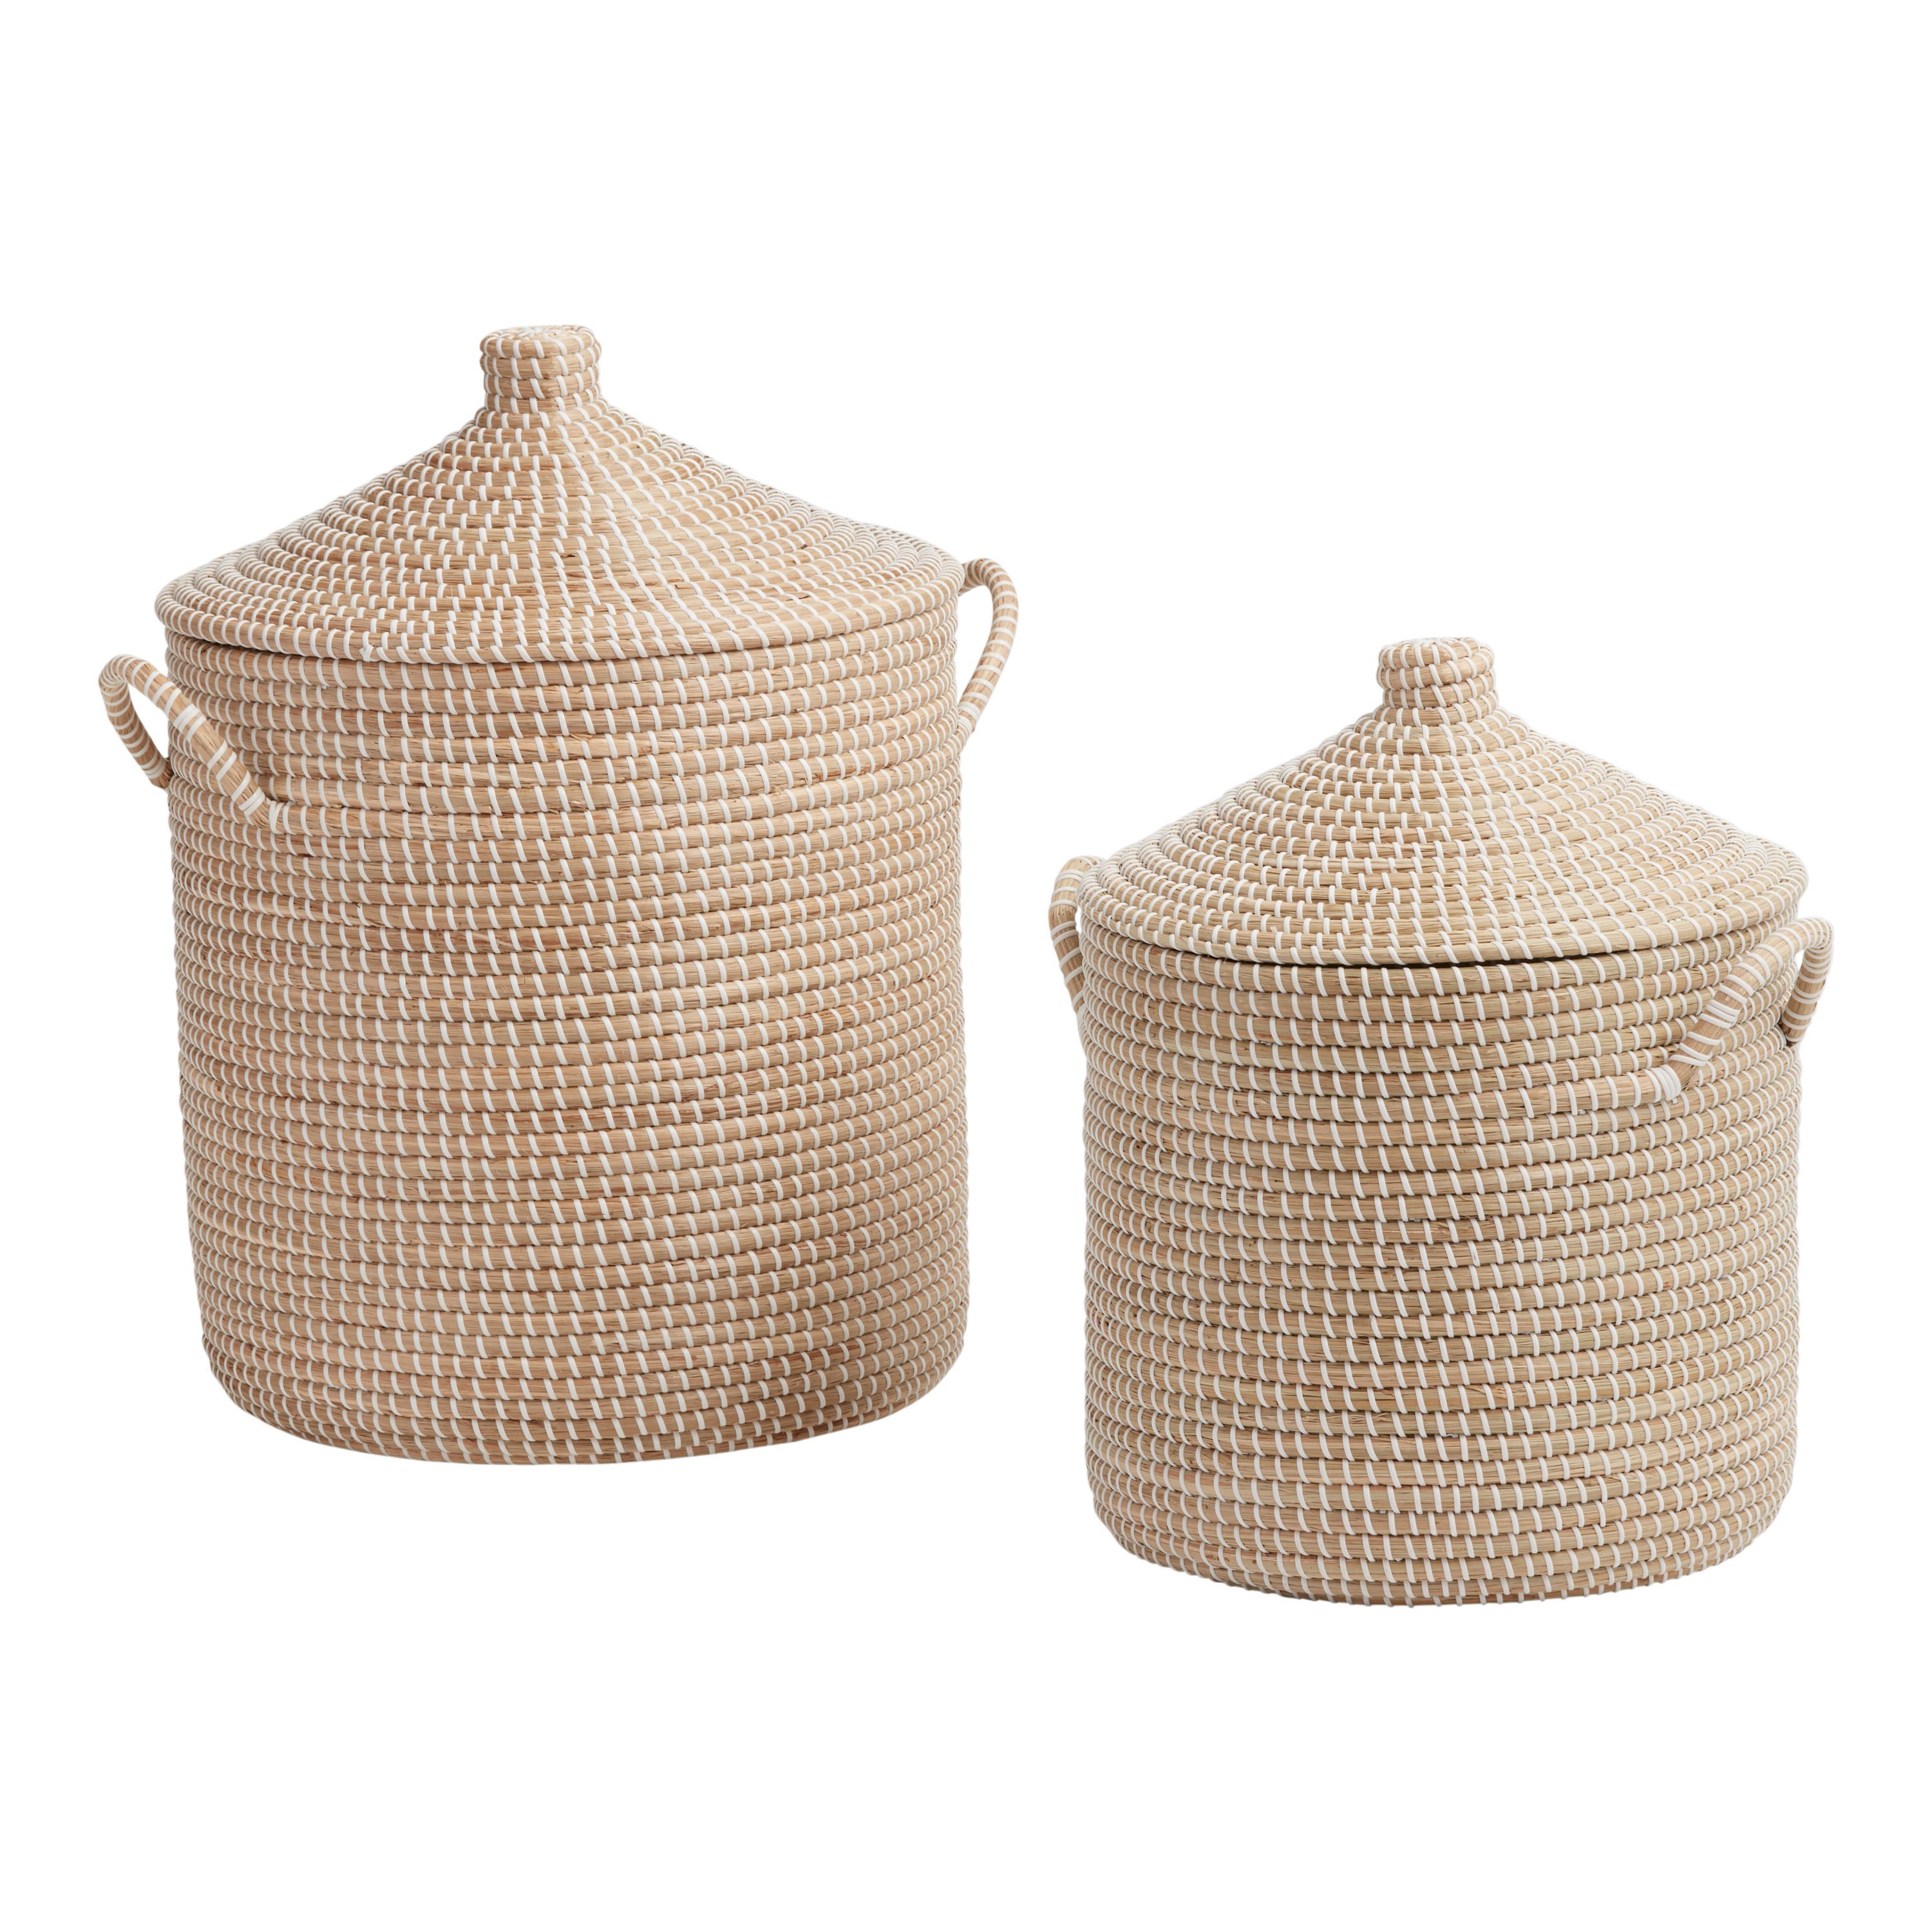 Adira White and Natural Seagrass Basket With Lid | World Market